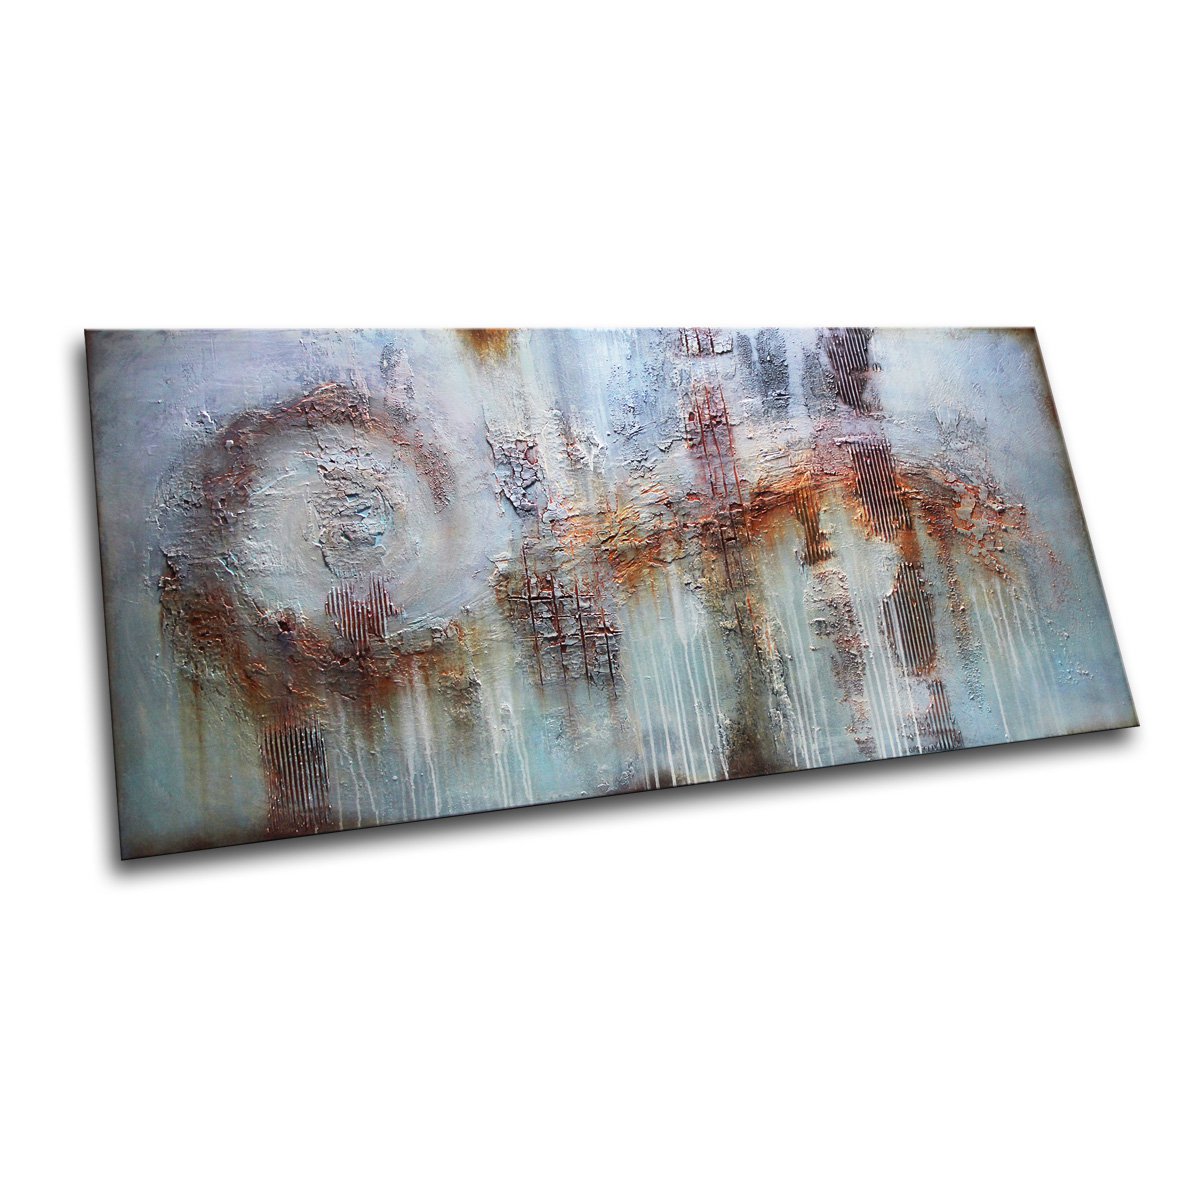 PANTA RHEI - 71 x 35.5 * ABSTRACT PAINTING TEXTURED * HUGE ARTWORK * XXL by Inez Froehlich